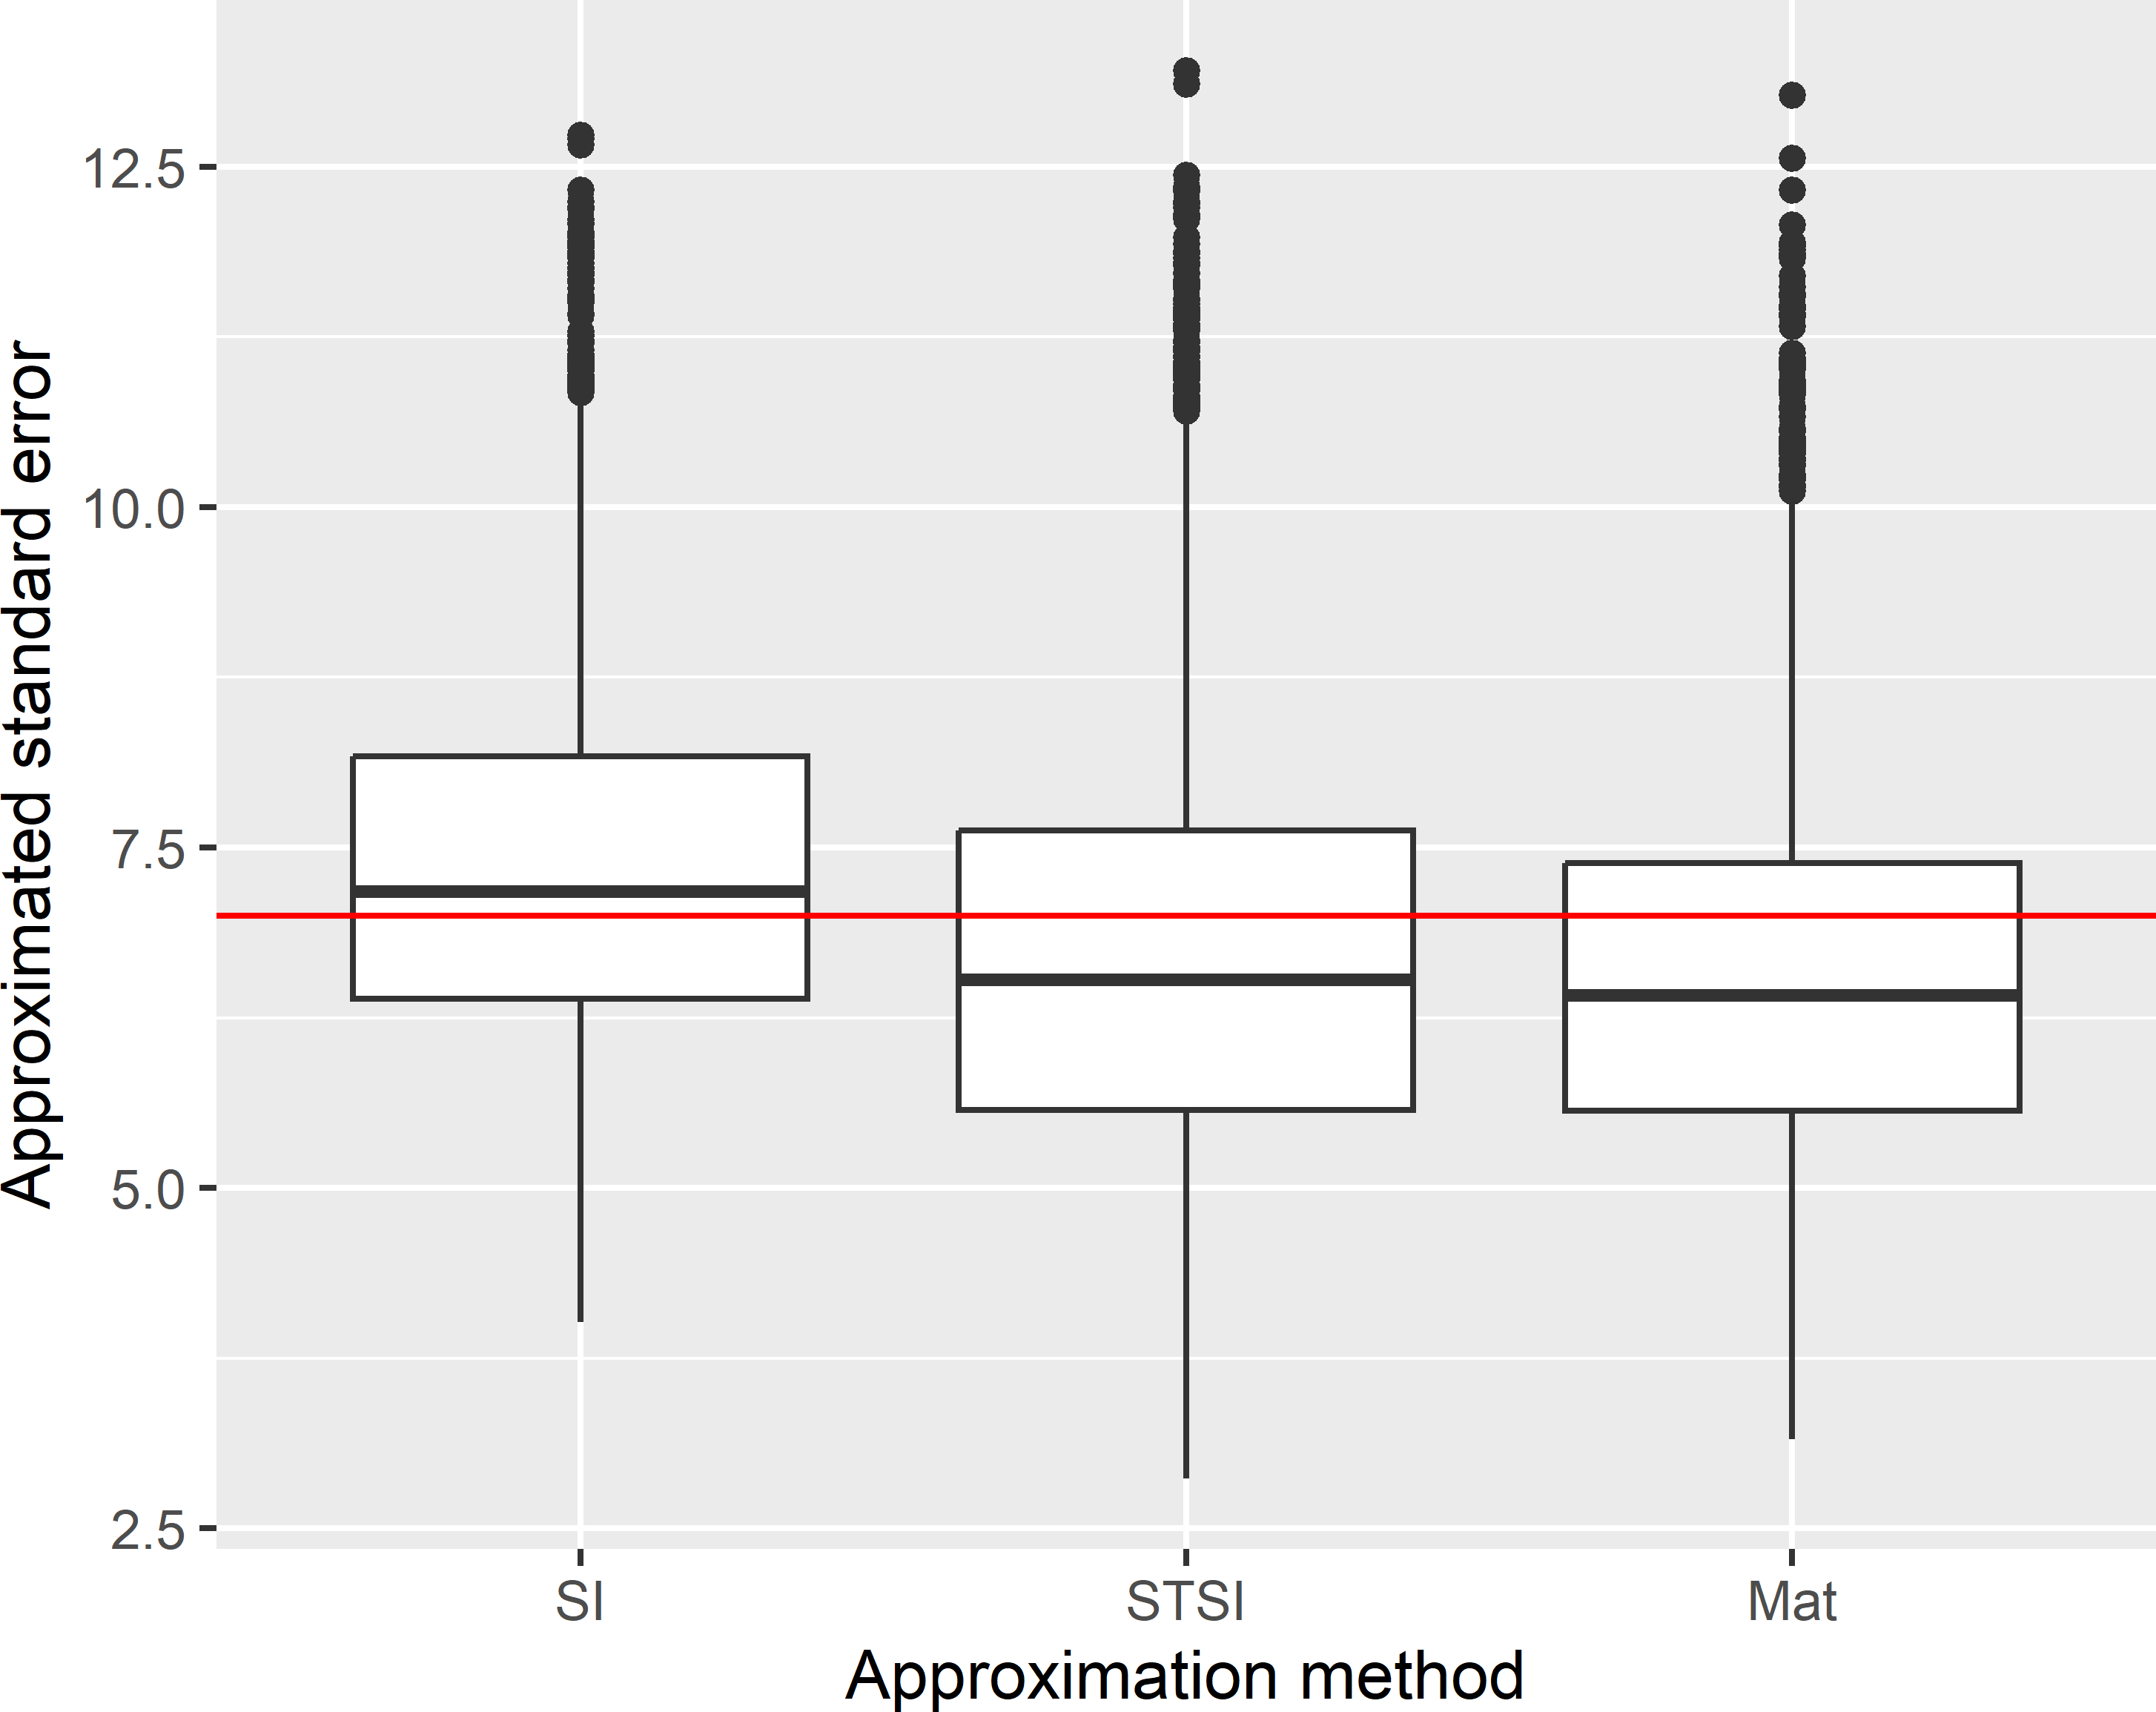 Sampling distribution of the approximated standard error of the ratio estimator of the mean SOM concentration (g kg-1) in Voorst, with systematic random sampling (square grid) and an expected sample size of 40. Approximations are obtained by treating the systematic sample as a simple random sample (SI) or a stratified simple random sample (STSI), and with Matérn’s method (Mat).